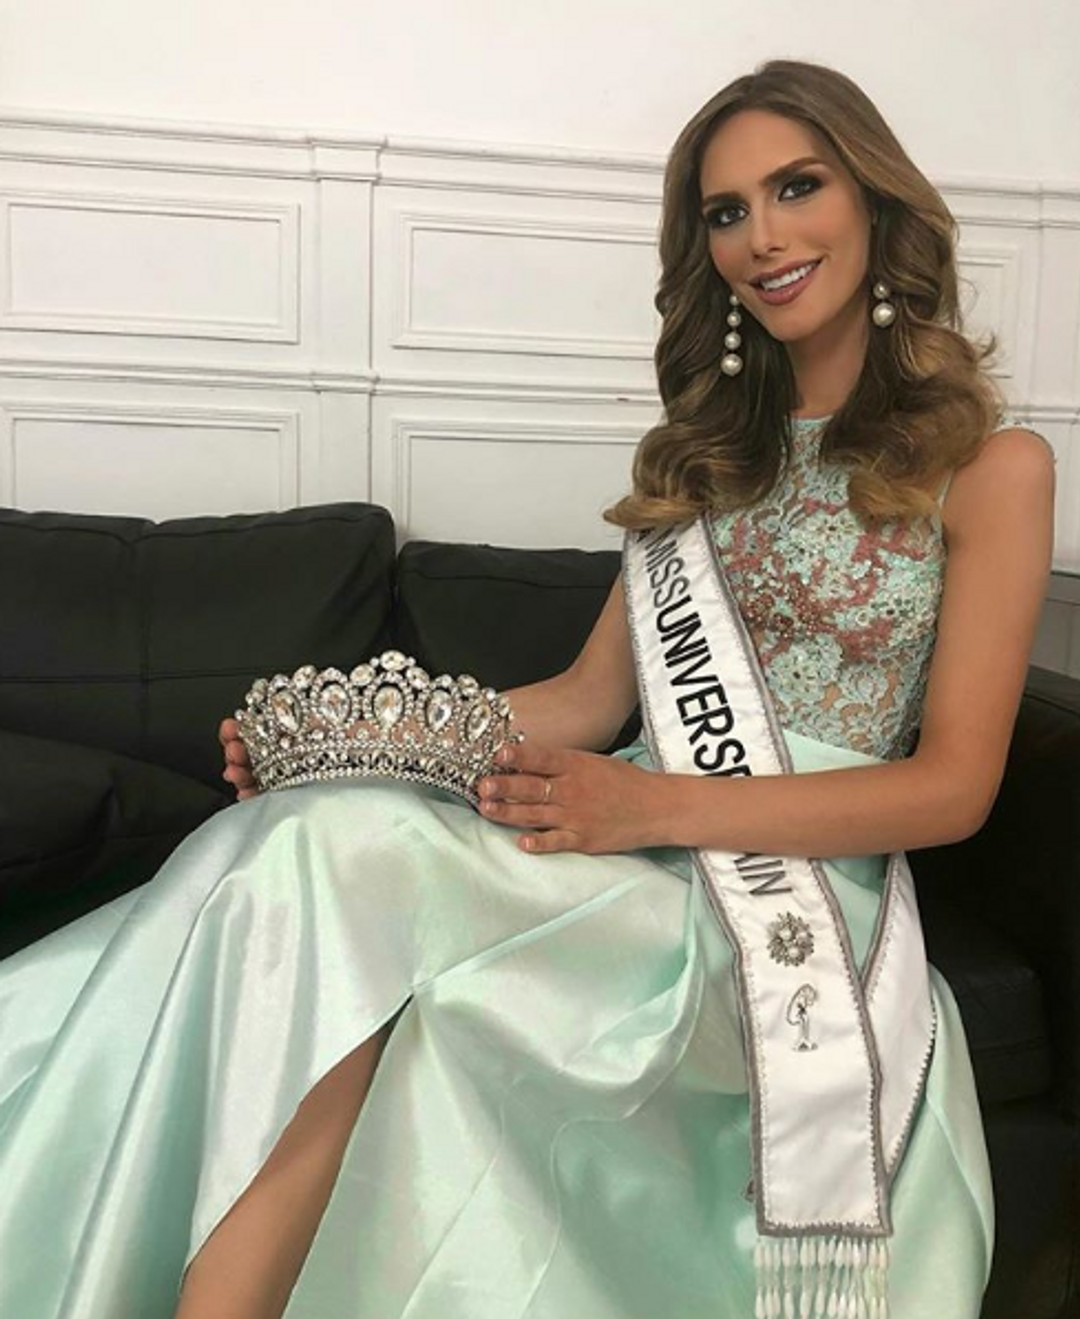 Miss Universe trans model uses pageant to fight phobia